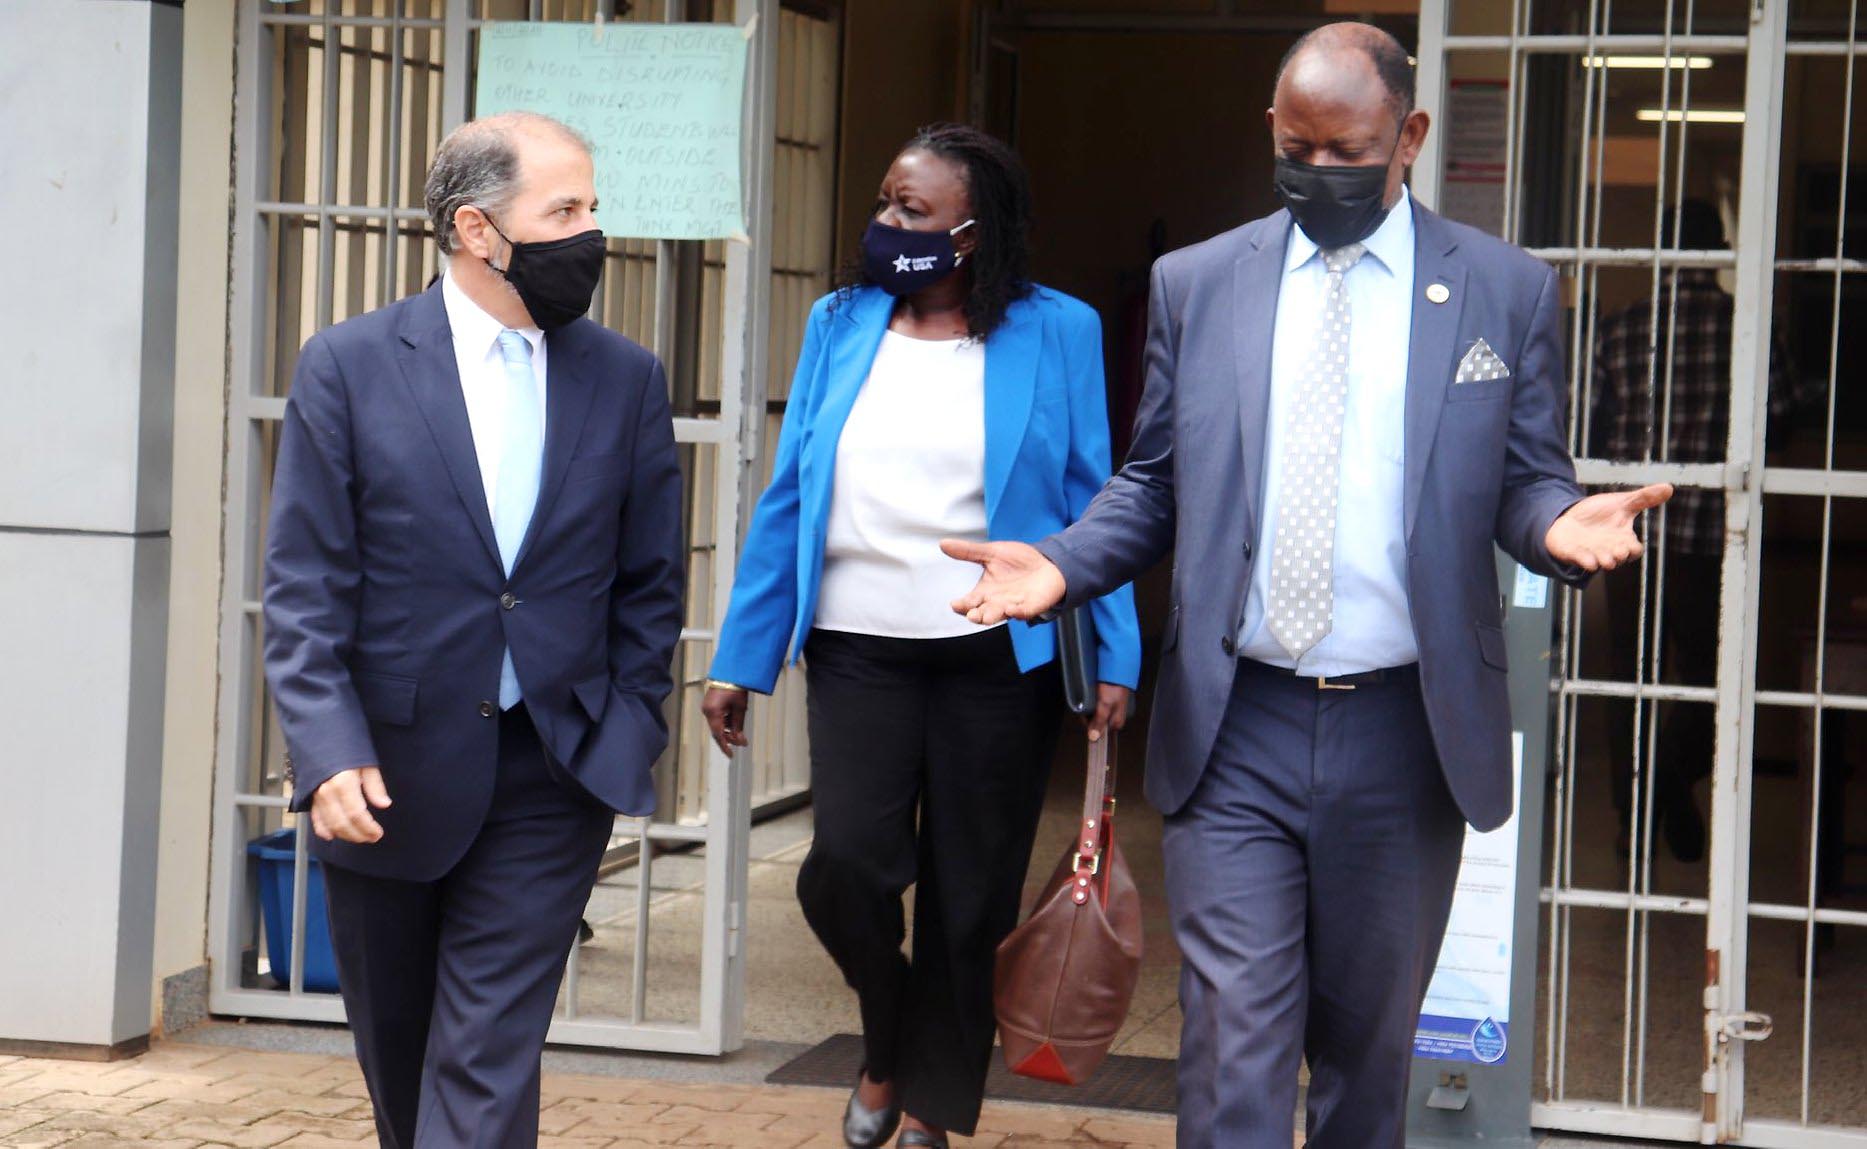 The Vice Chancellor-Prof. Barnabas Nawangwe (R) chats with Brian George (L) and Dorothy Ngalombi (C) after their meeting on 26th November 2020, Central Teaching Facility 1 (CTF1), Makerere University, Kampala Uganda.